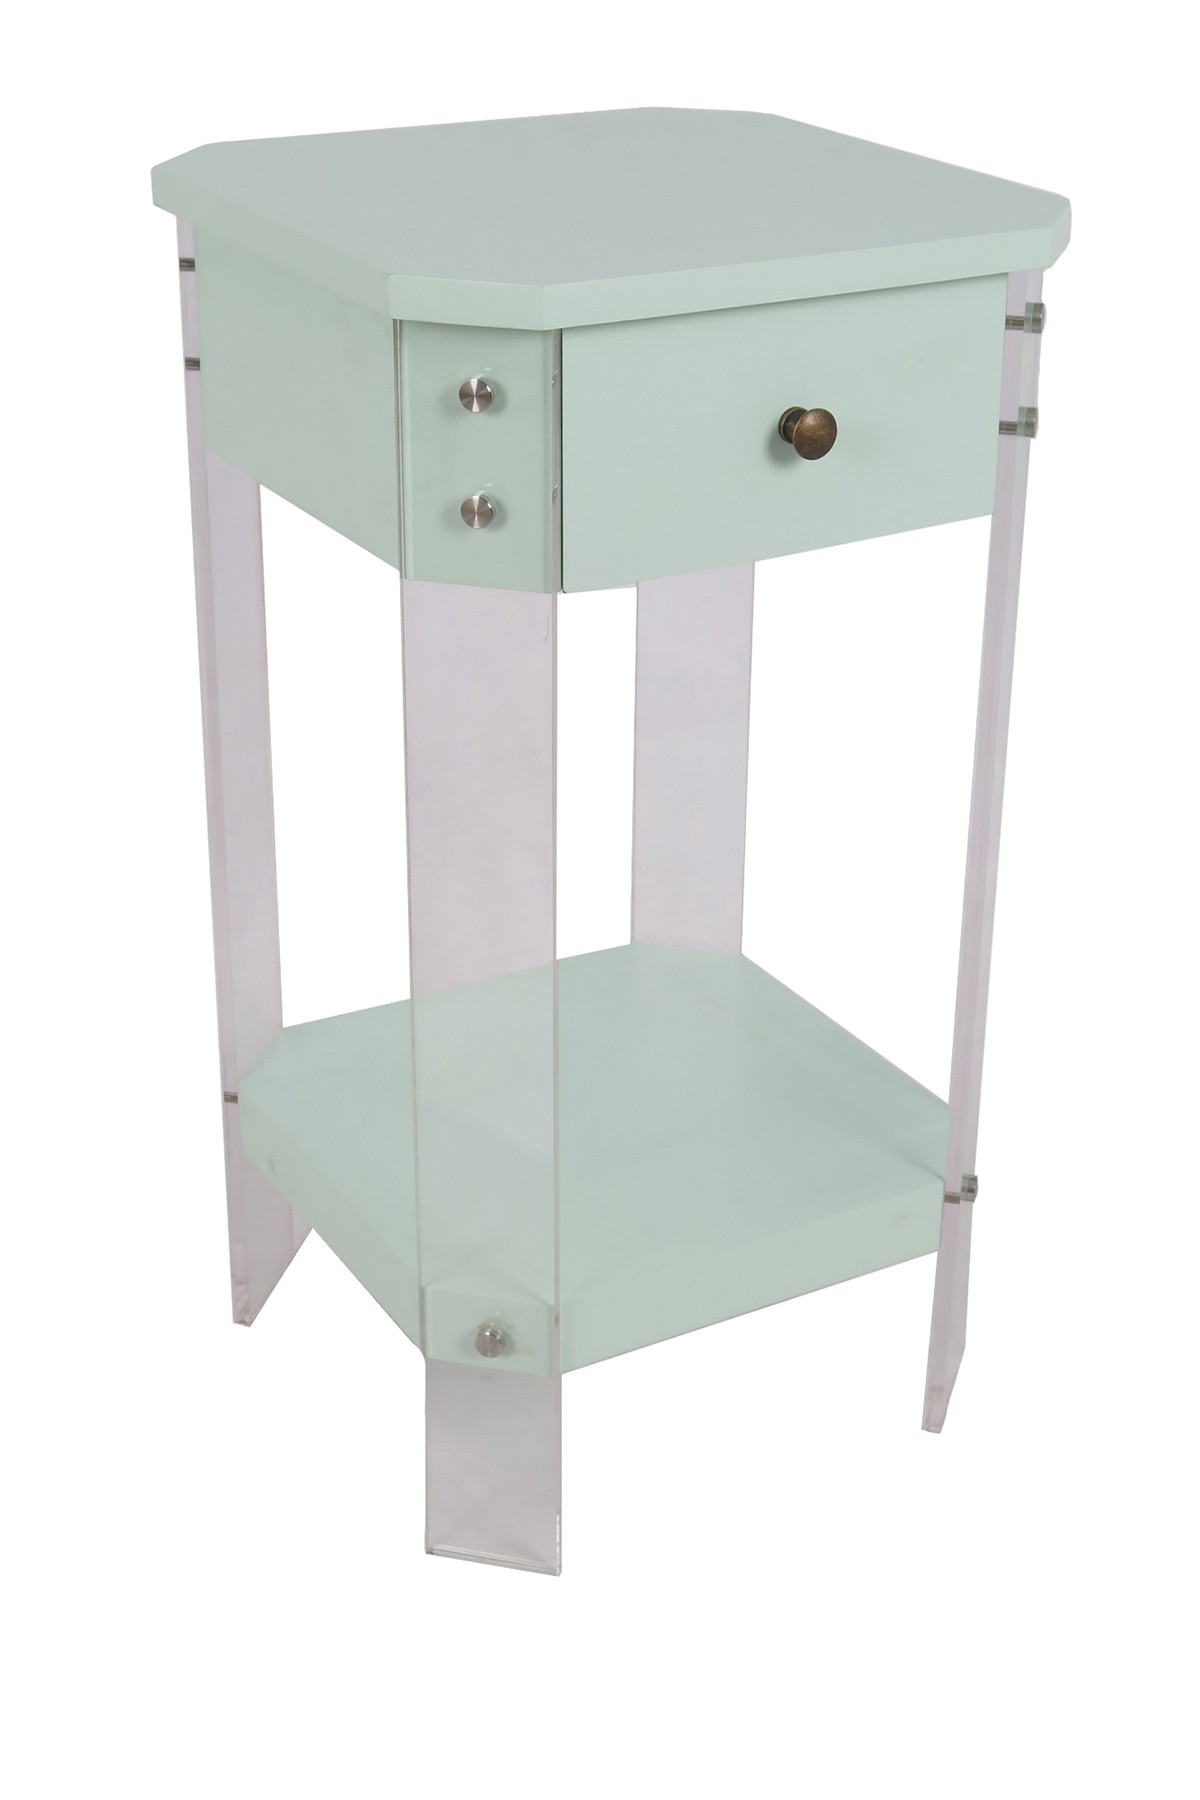 sagebrook home mint green square accent table with drawer metal grill cover trestle dining inch high end tiffany style lamp shades ikea chairs drum throne height small half circle